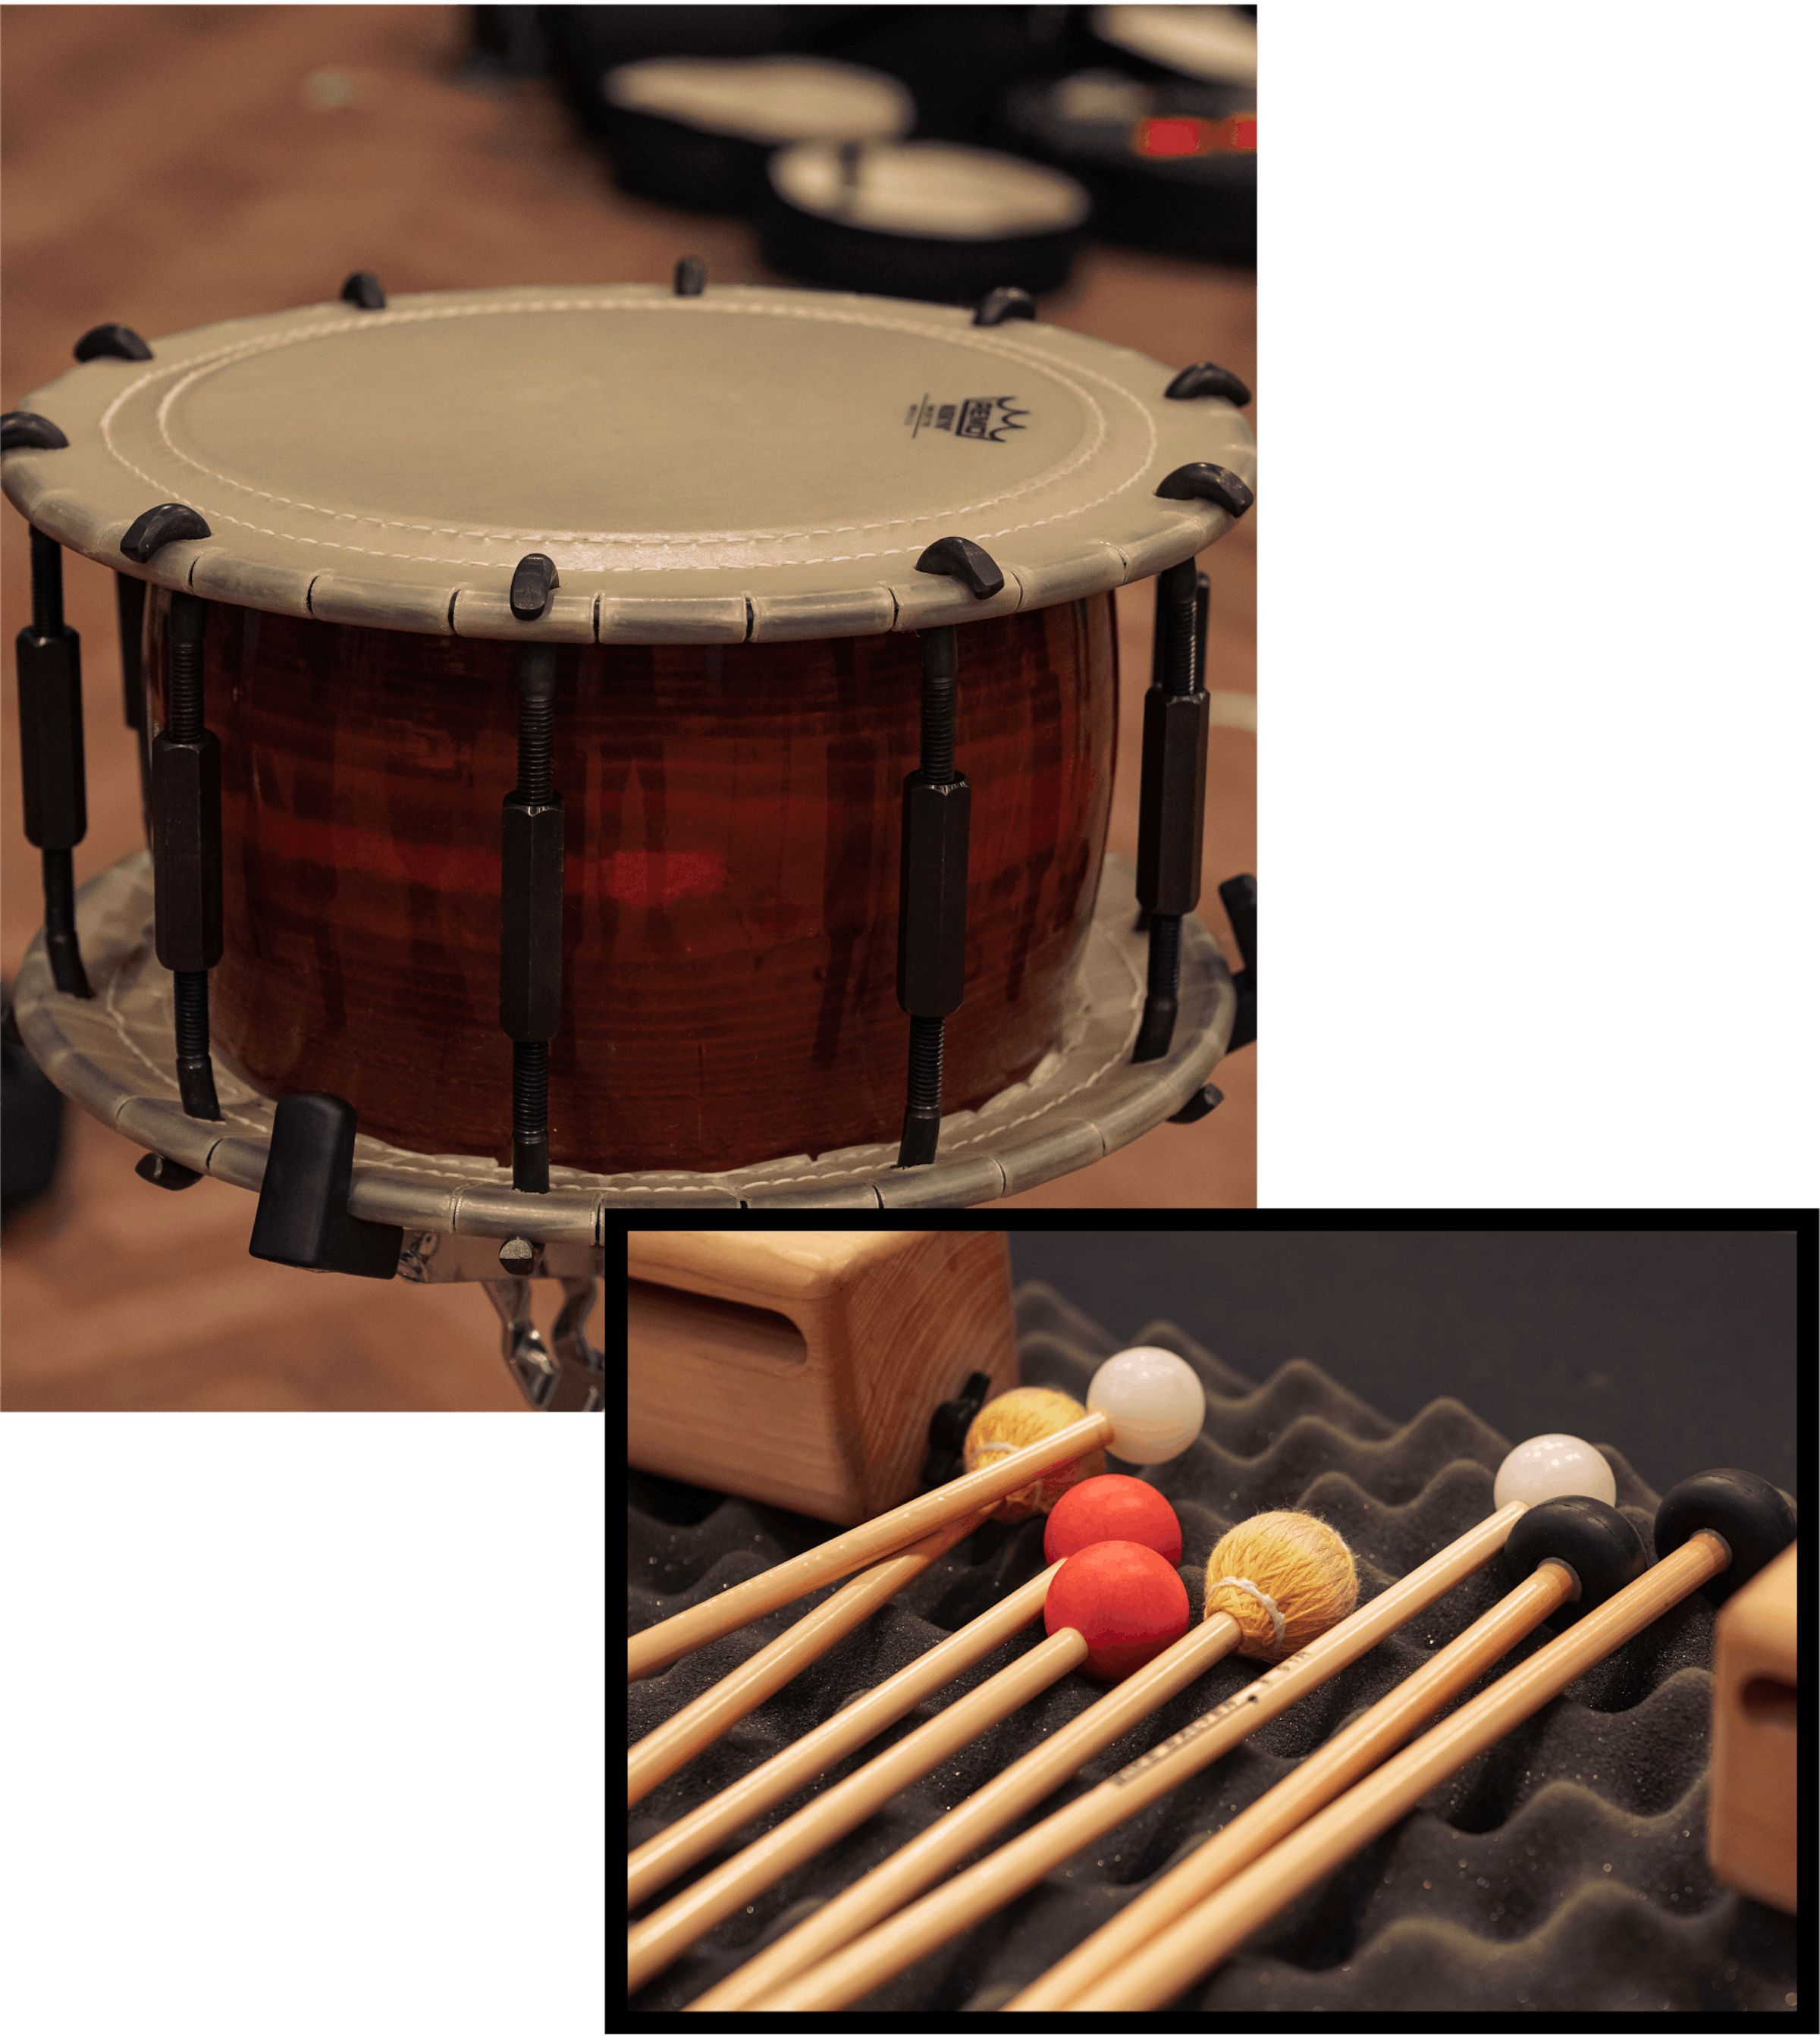 Mallets and sticks used for recording